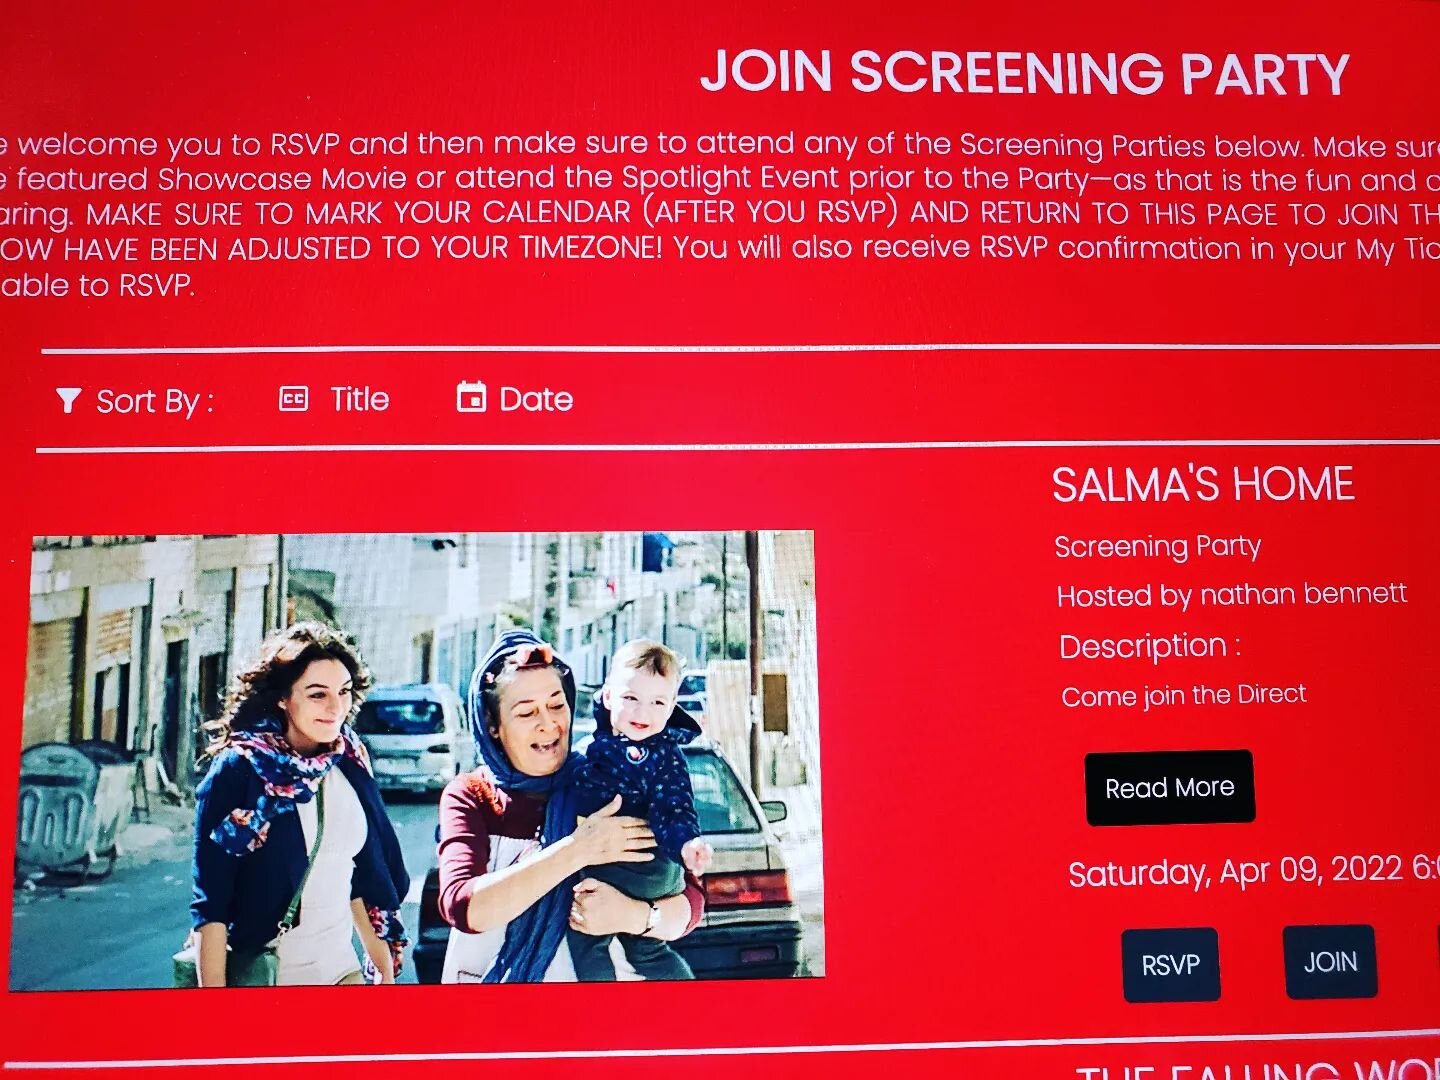 TODAY! To celebrate the end of the virtual run with Cinequest film festival, join us (Nathan, Hanadi, Rania, Sameera and potentially Juliet) on Zoom today 3pm PST San Jose, CA time.

https://creatics.org/cinejoy/screening-parties/join 

@hanadielyan 